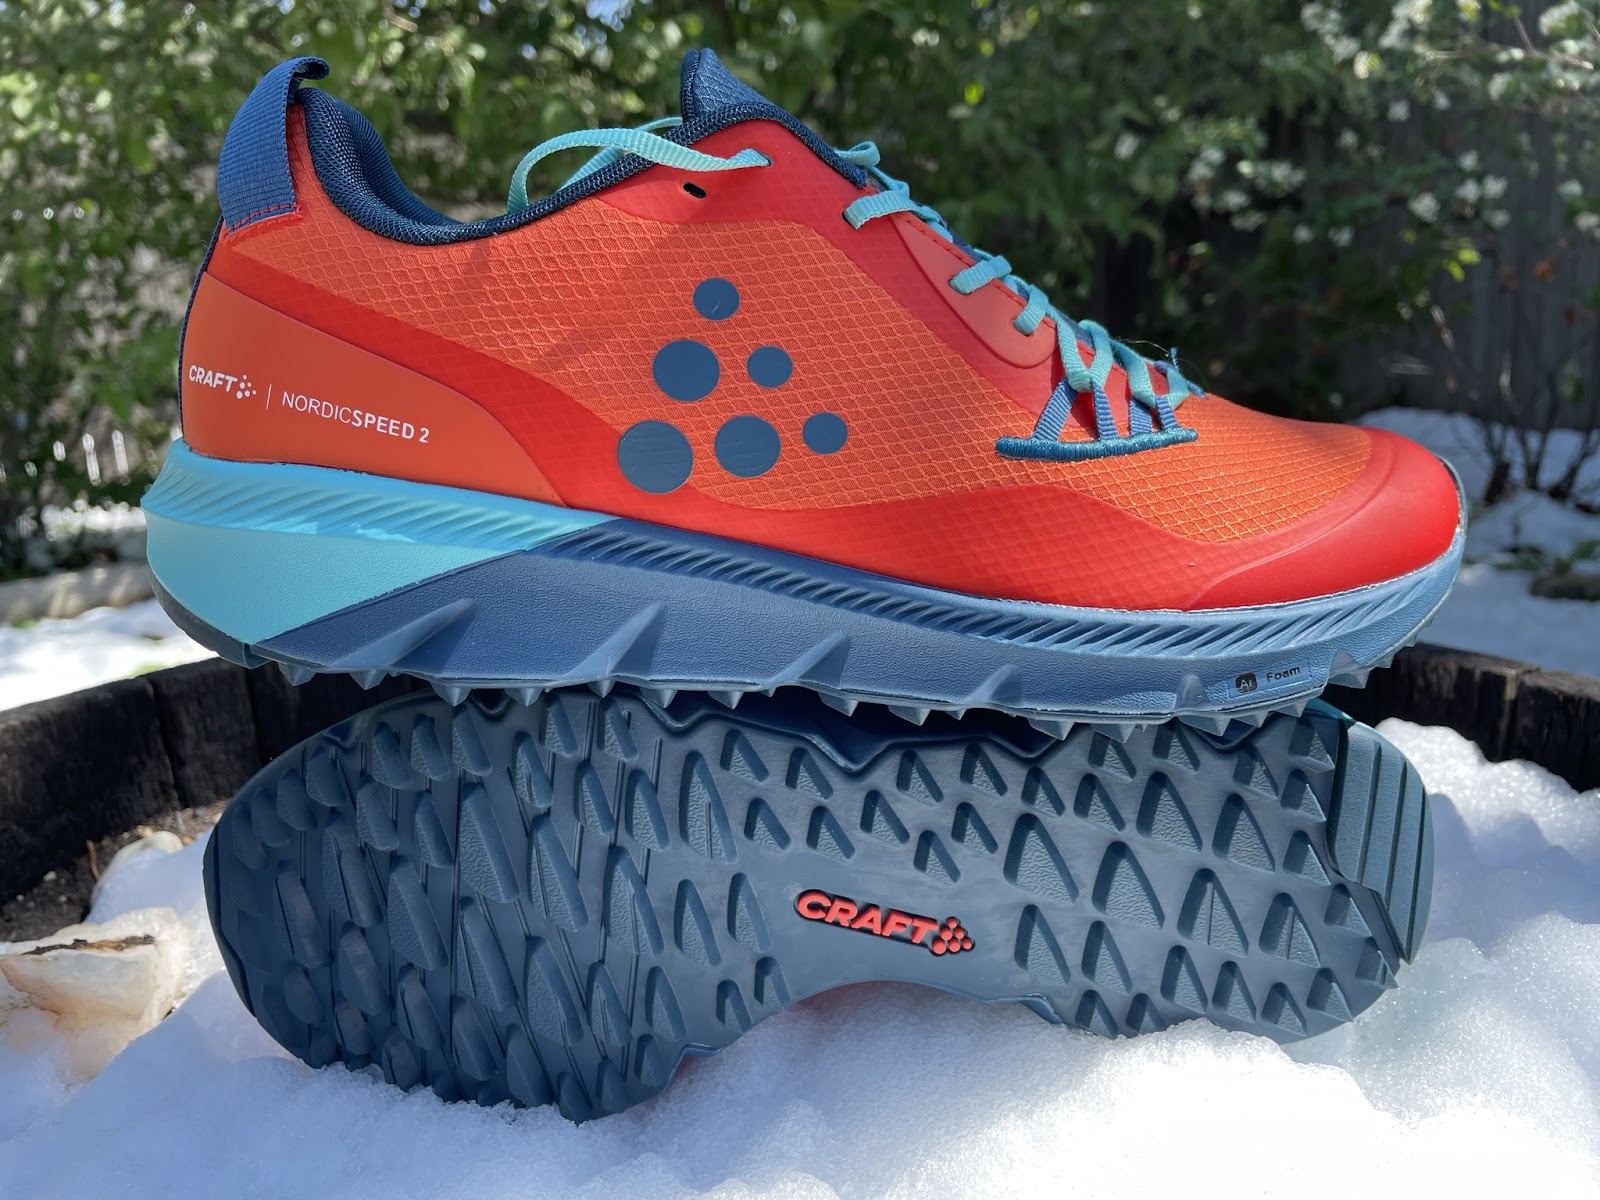 Road Trail Run: Craft ADV Nordic Speed 2 Multi Tester Review